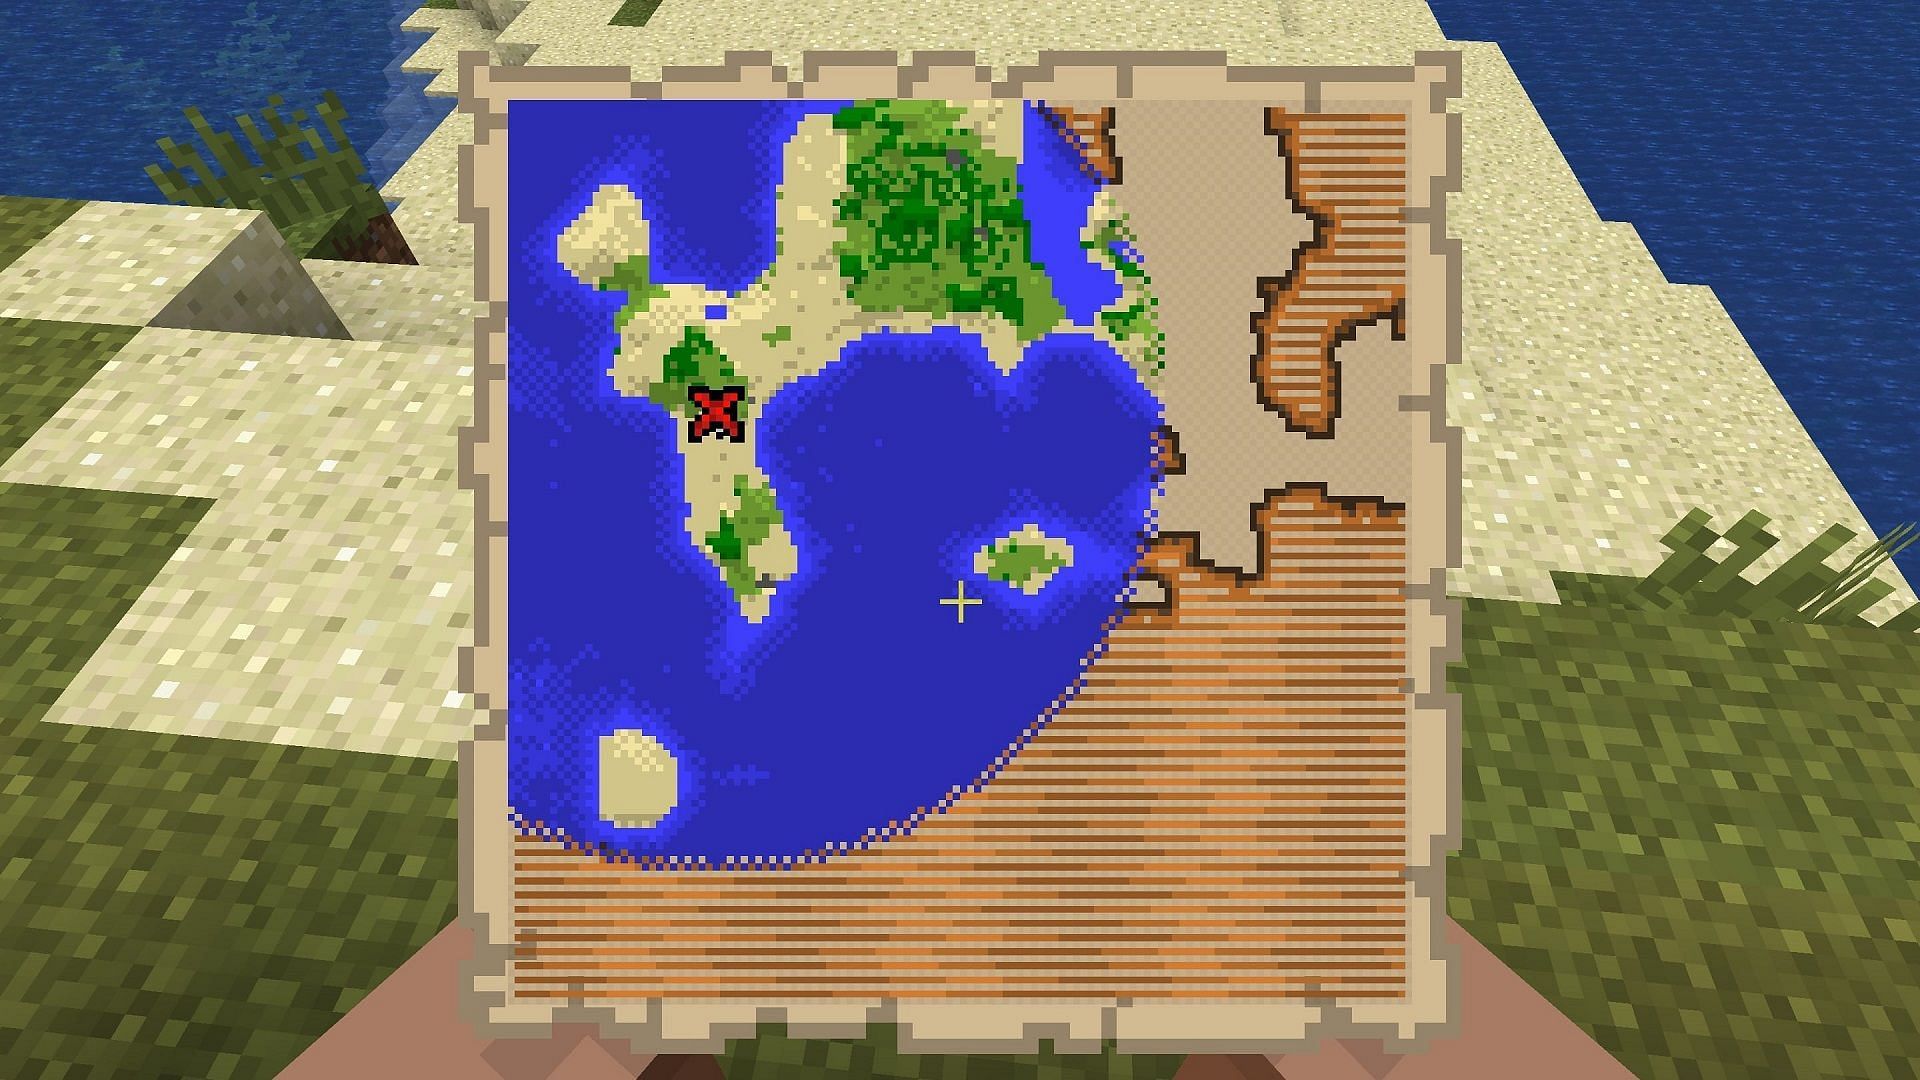 Treasure maps can lead to some great loot in Minecraft (Image via Minecraft Seeds HQ)